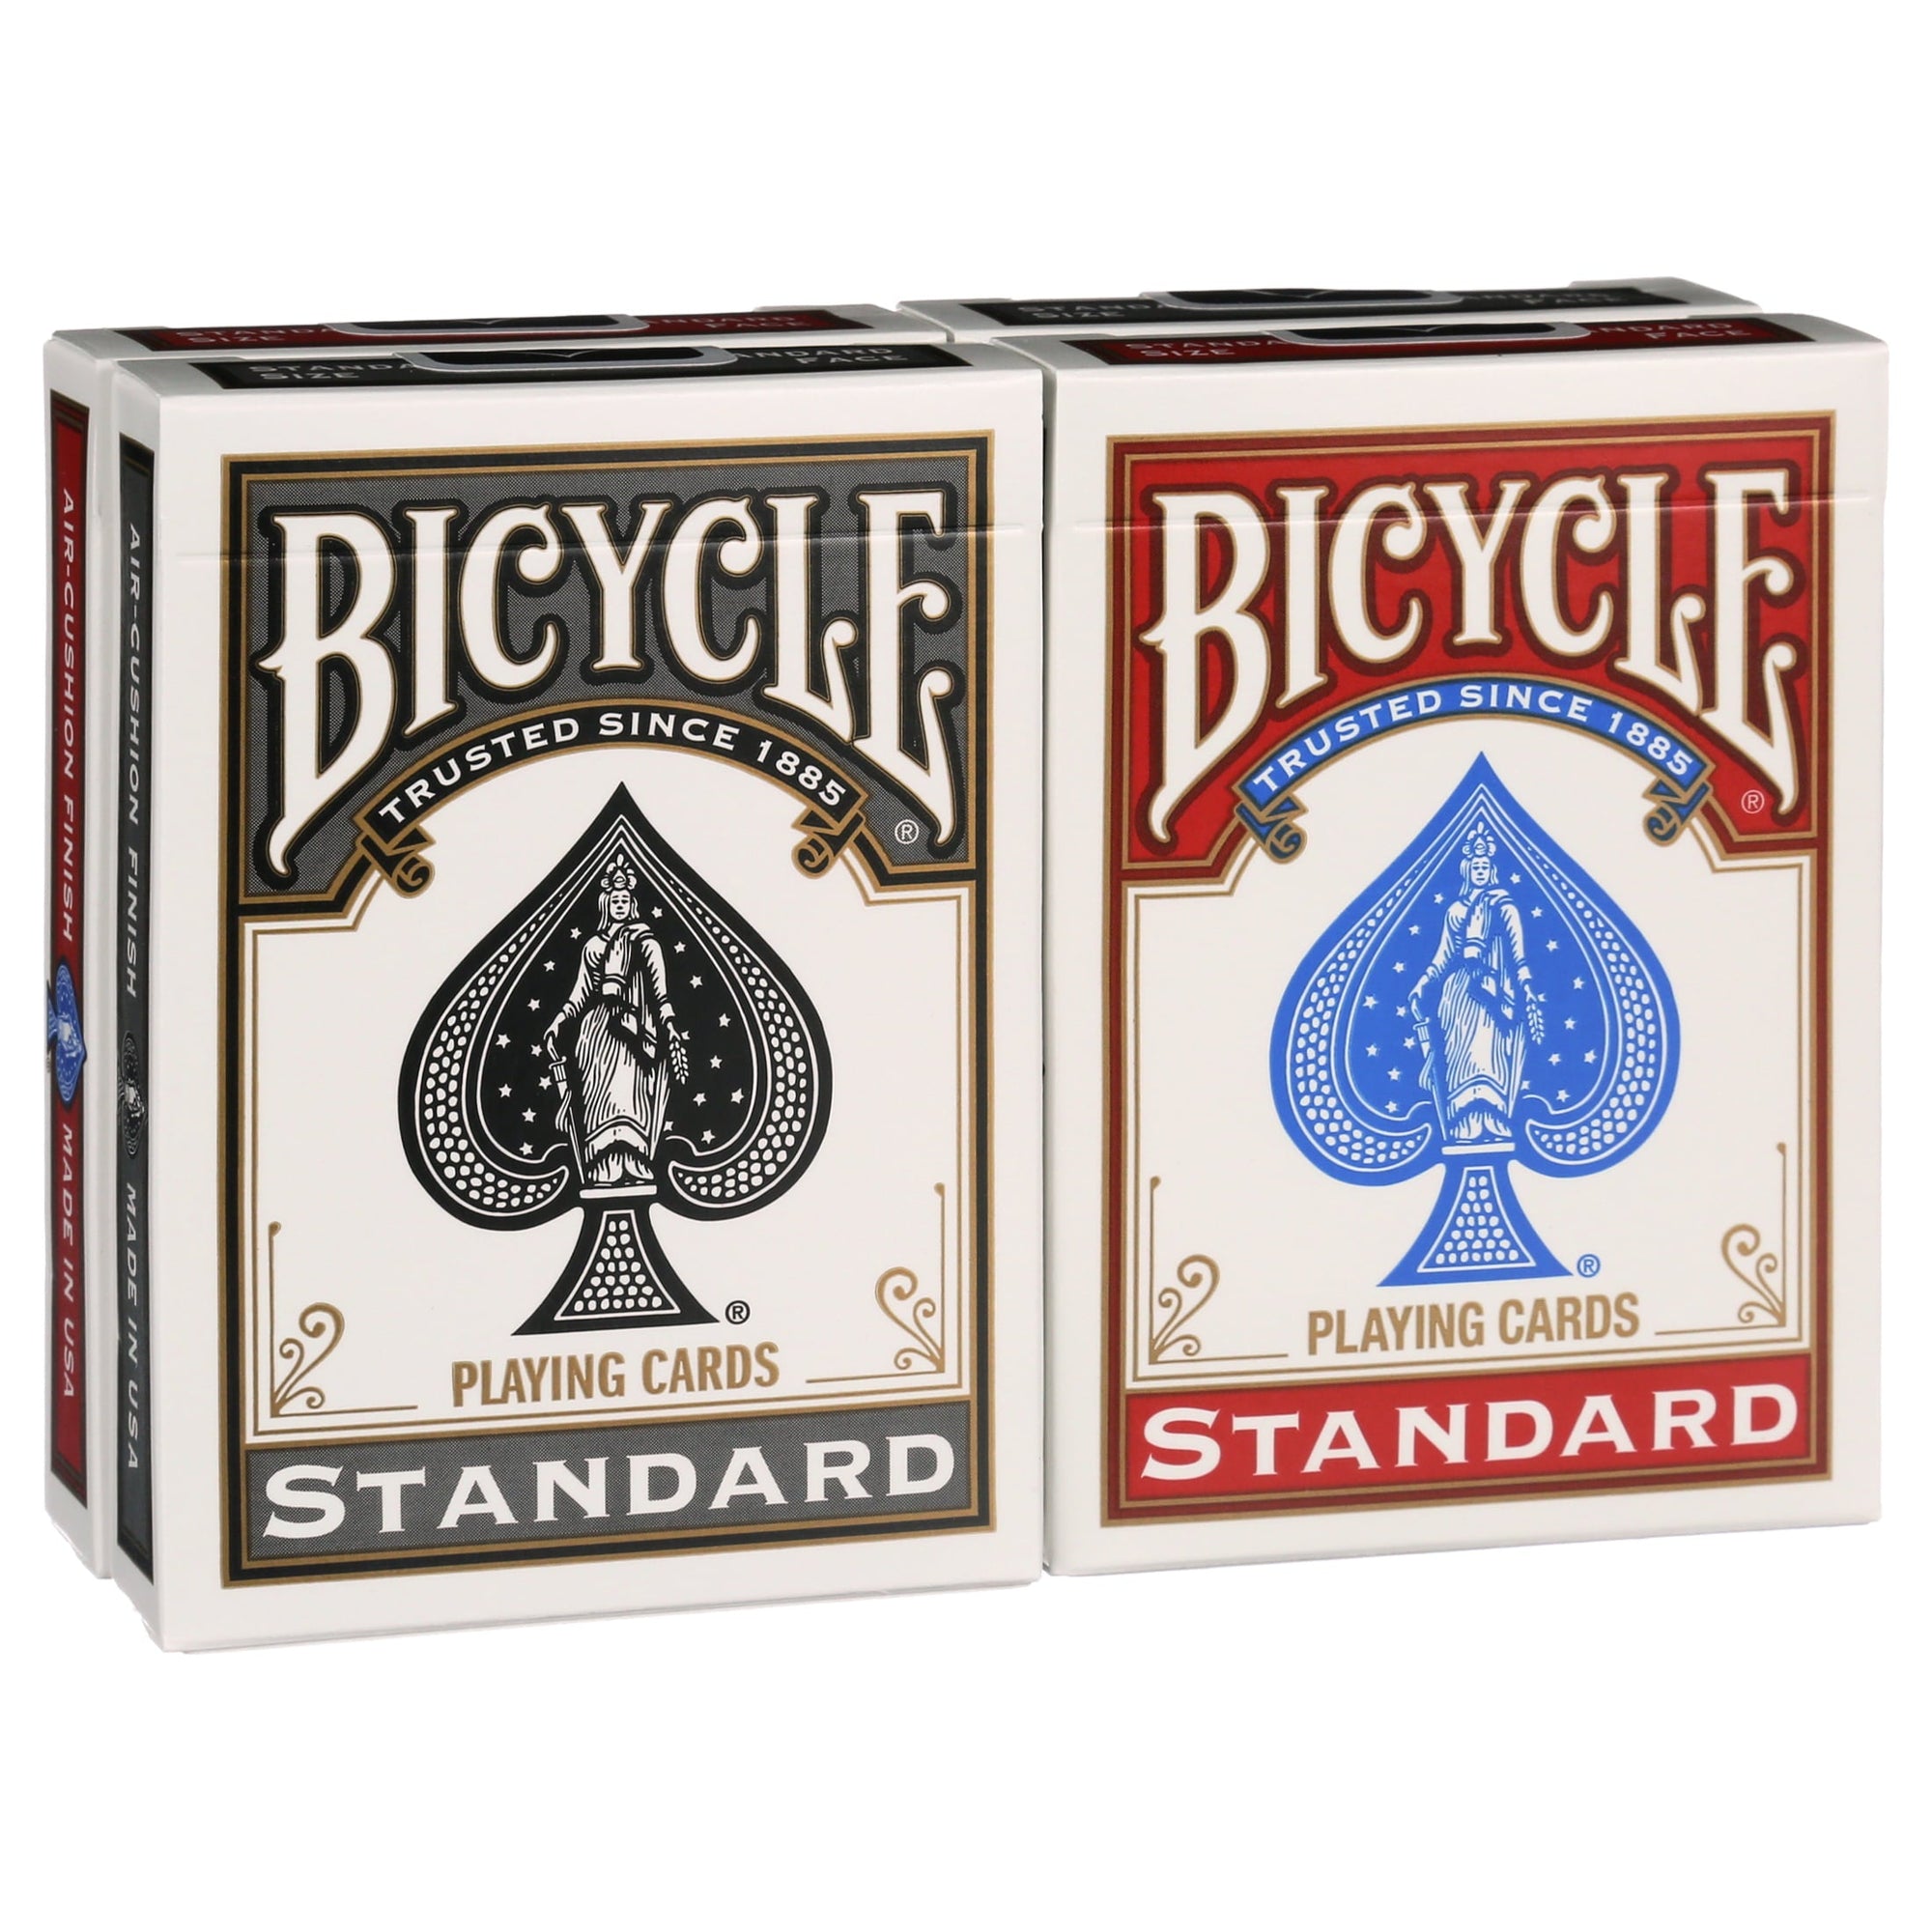 Bicycle Special Value 4 Decks Playing Cards-United States Playing Cards Company-Ace Cards & Collectibles